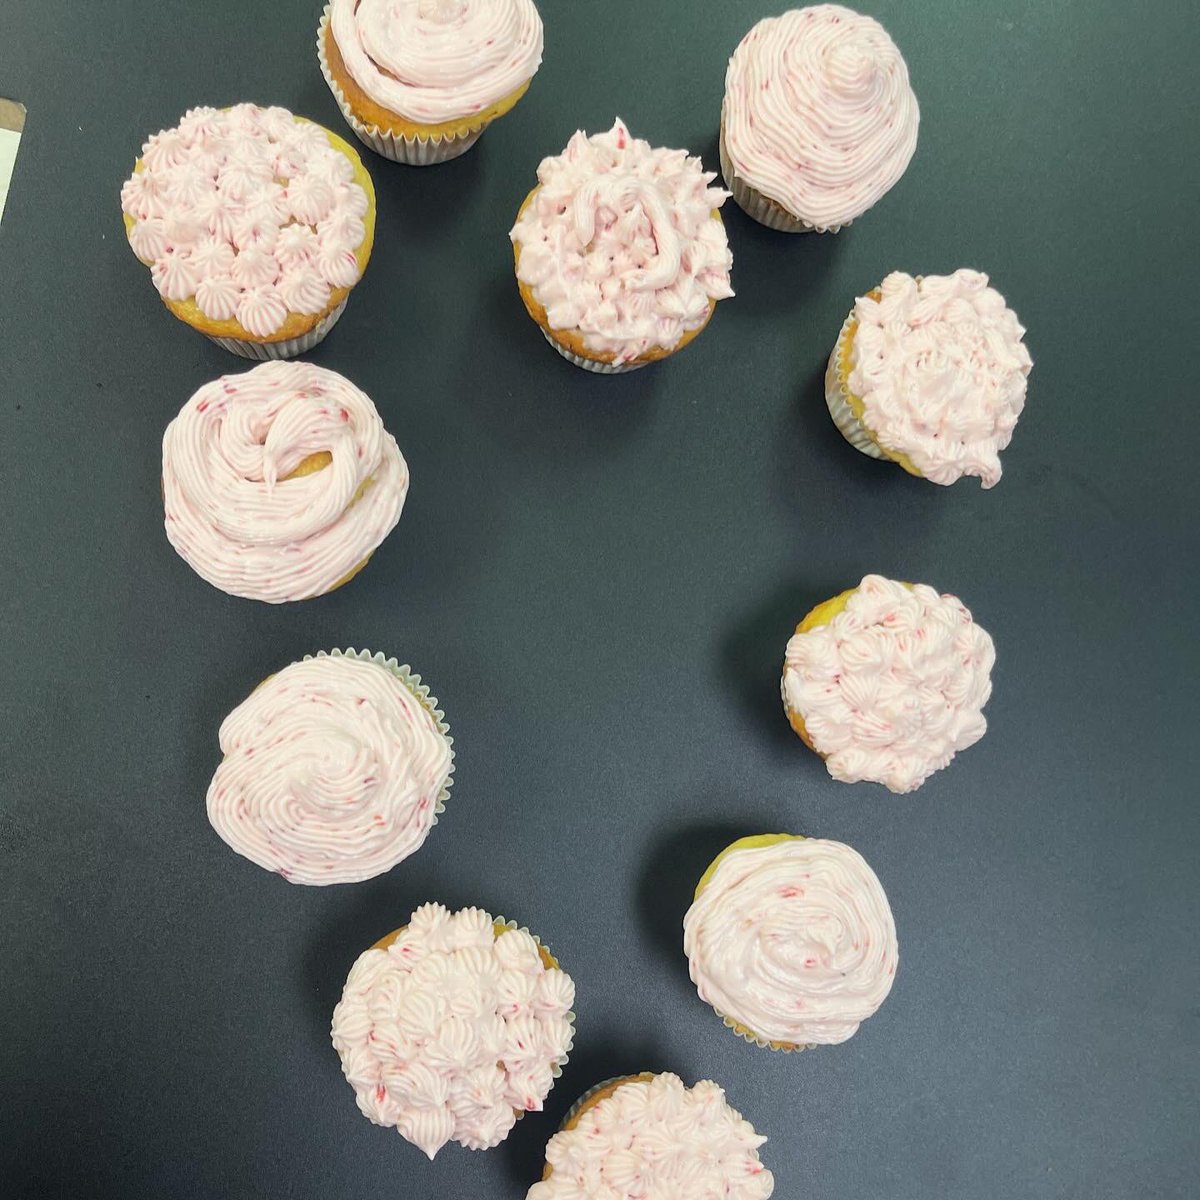 Fridays were made for sweets, and our Culinary Art class knows how to make some tasty cupcakes! 🧁

#lightofchance #breatheyoutharts #youtharts #music #dance #visualarts #culinary #creativewriting #madisonvilleky #bowlinggreenky